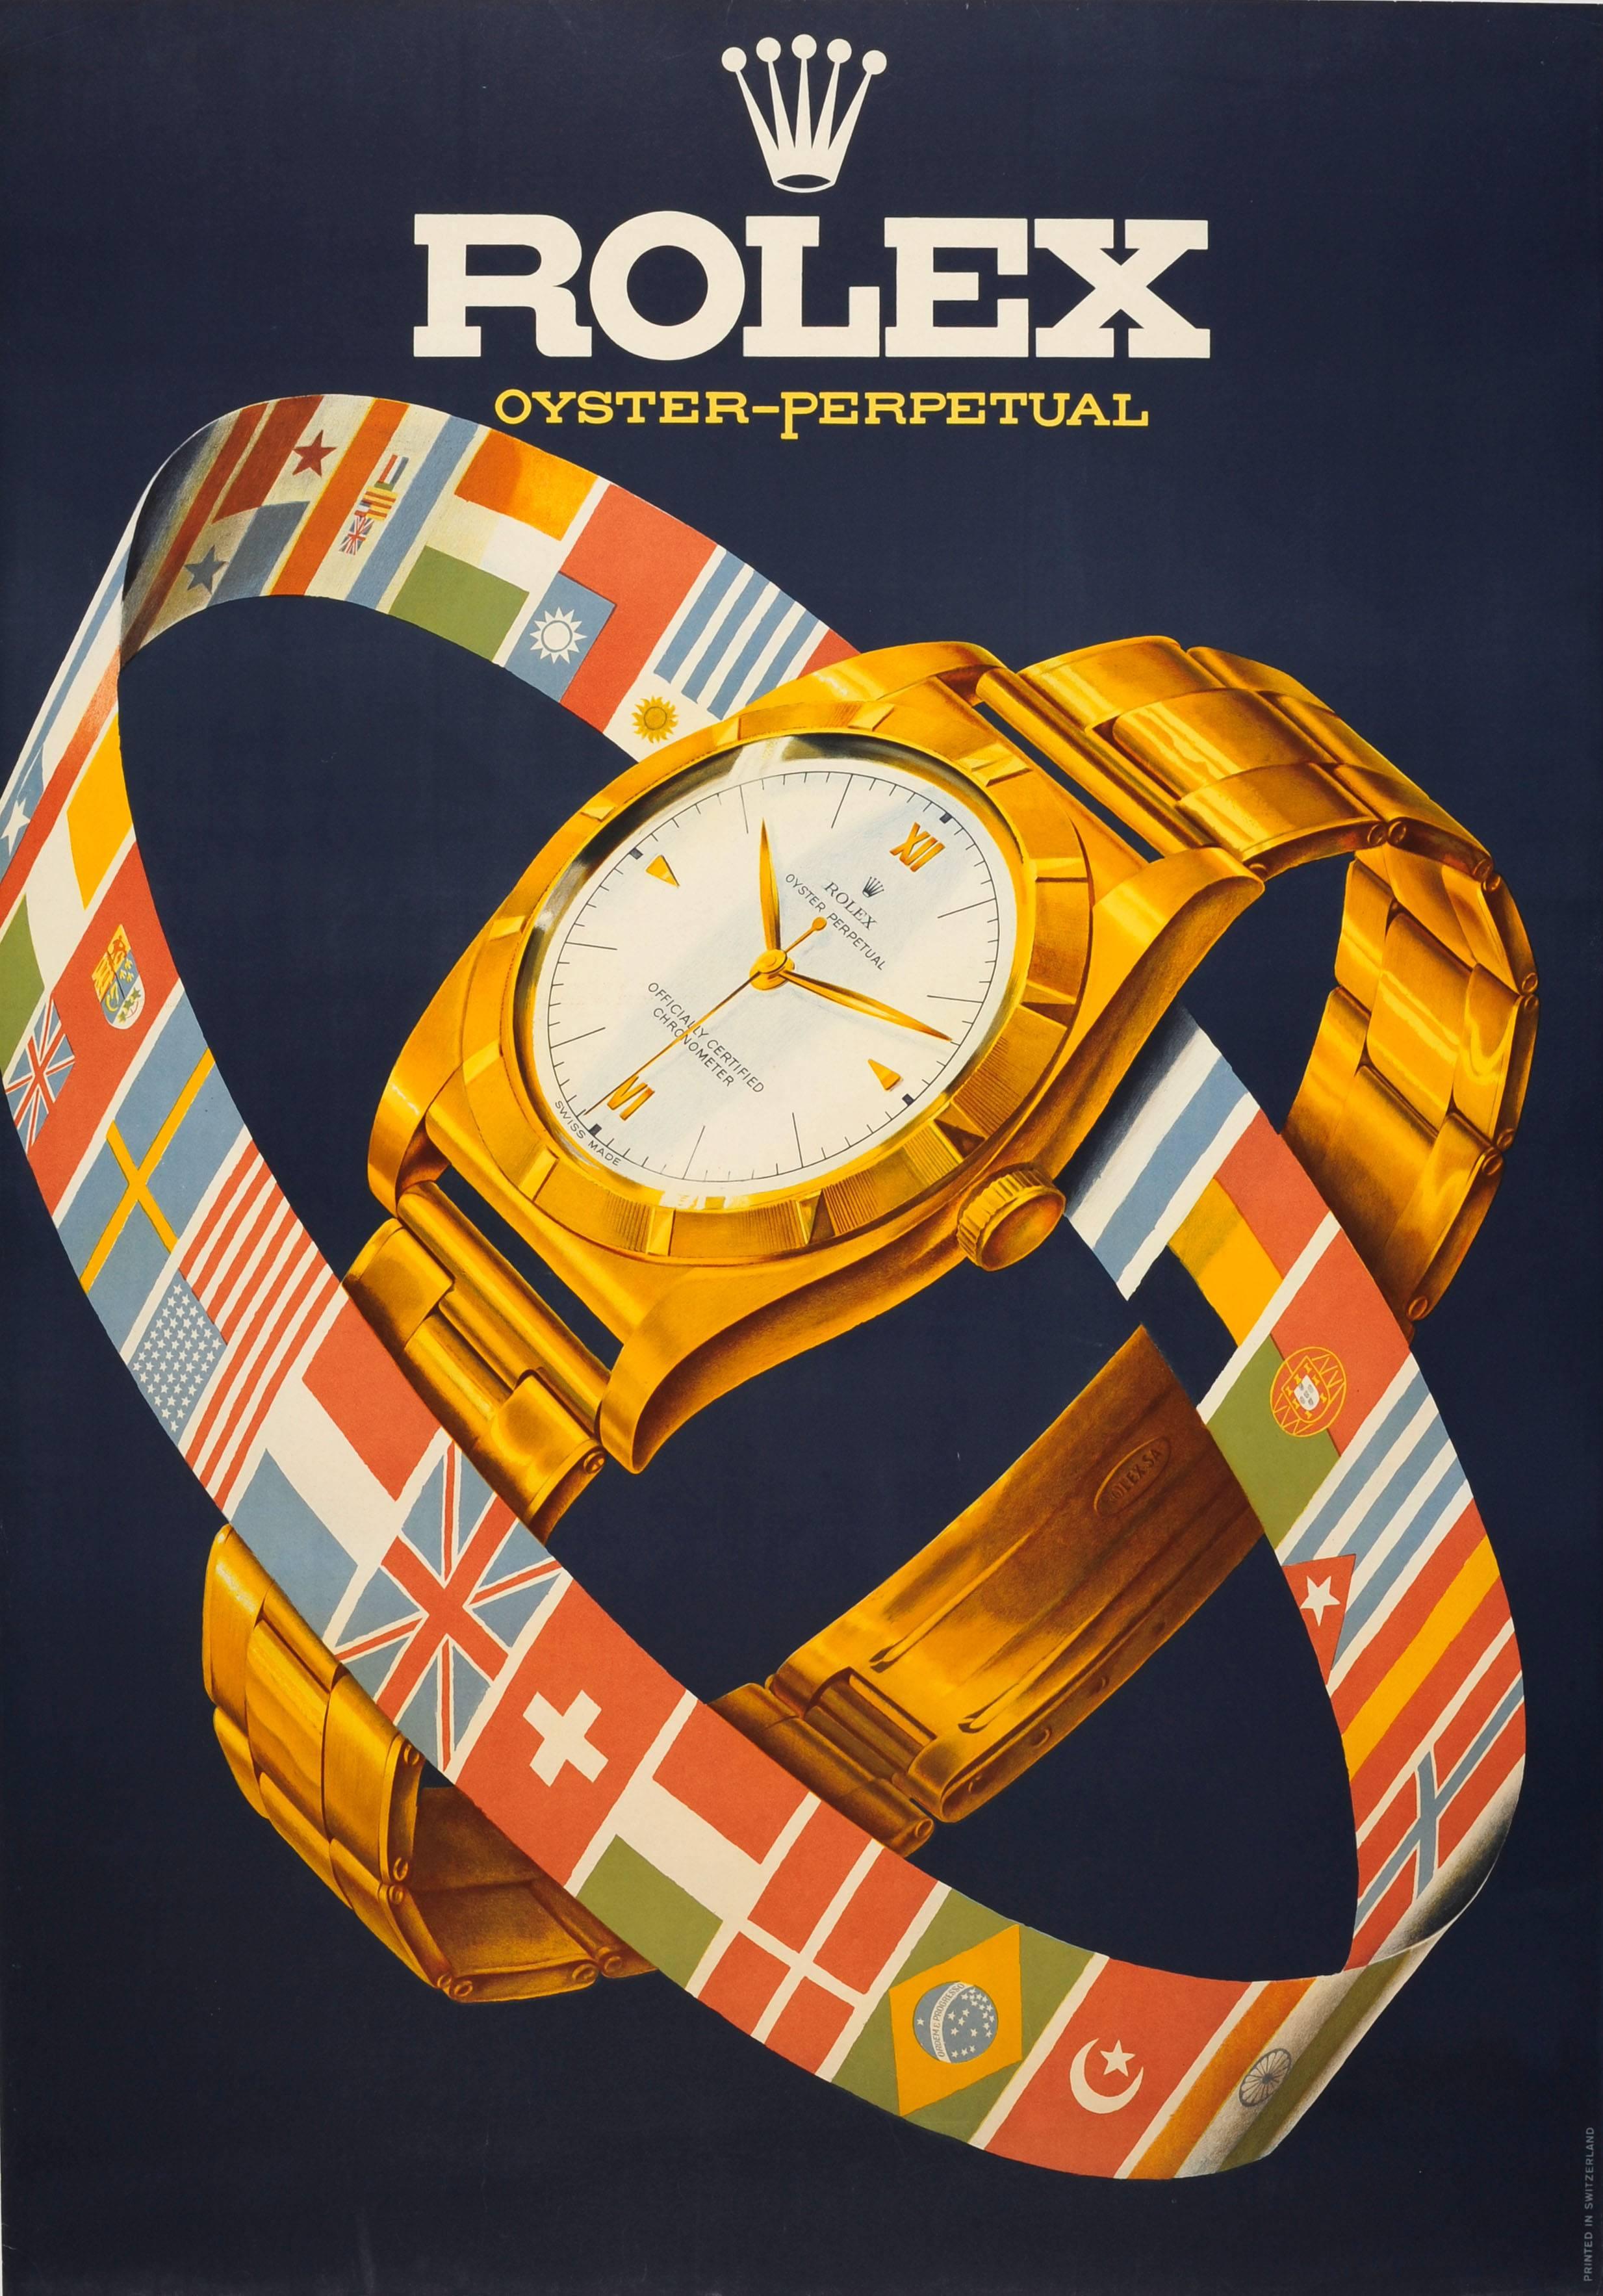 Unknown Print - Original Vintage Poster For Rolex Oyster Perpetual Swiss Luxury Watch Models